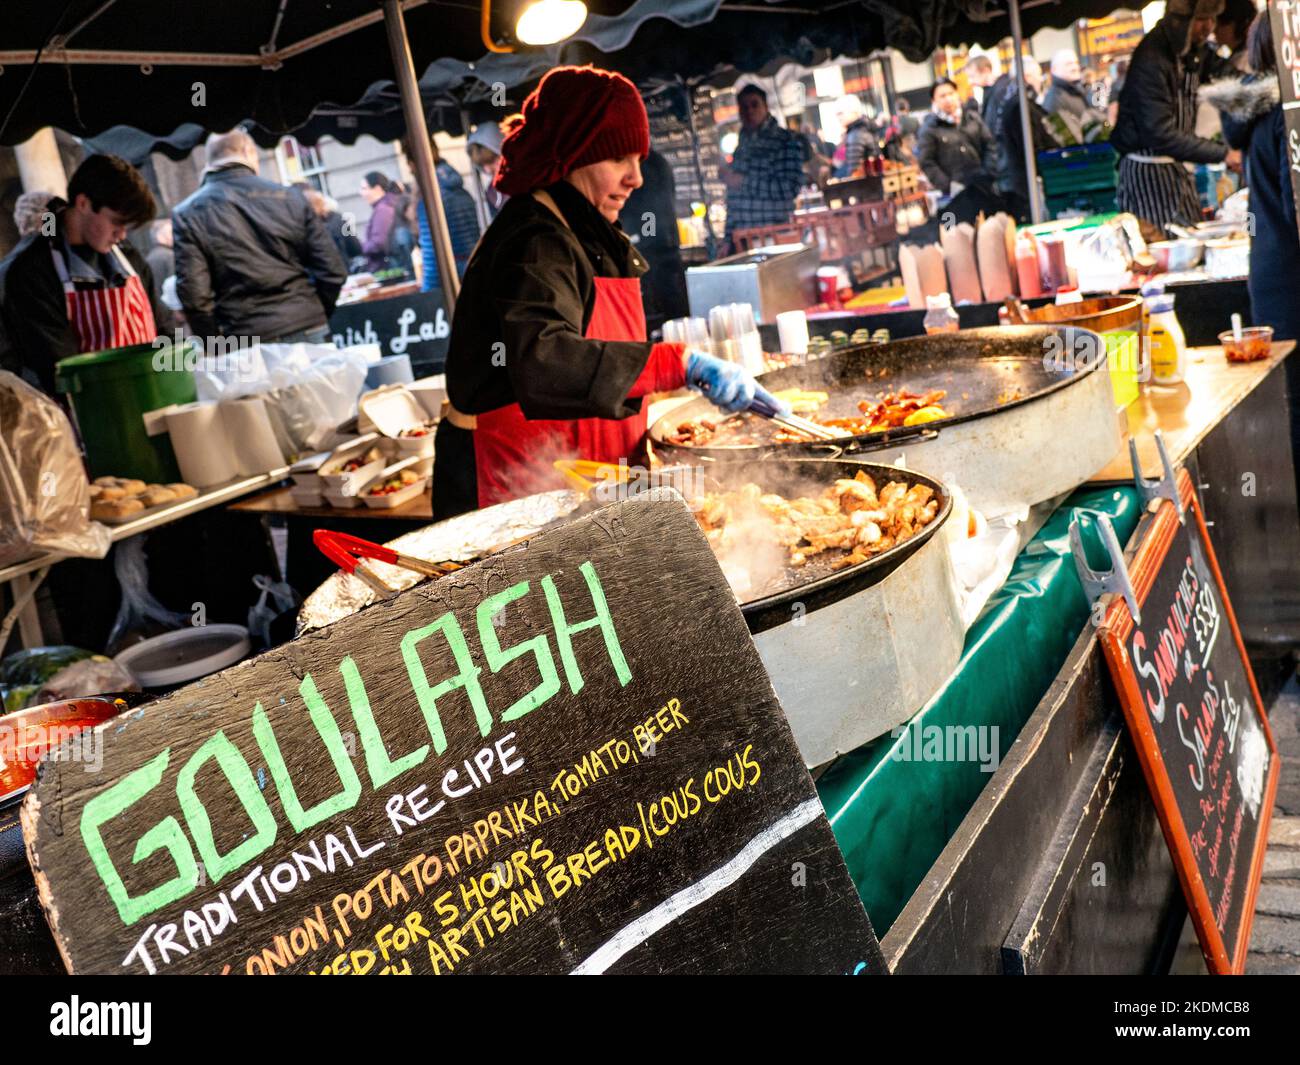 GOULASH WINTER MARKET STREET FOOD ALFRESCO DINING LONDON Hot fast food on sale at Covent Garden winter street food piazza market stall London UK Stock Photo